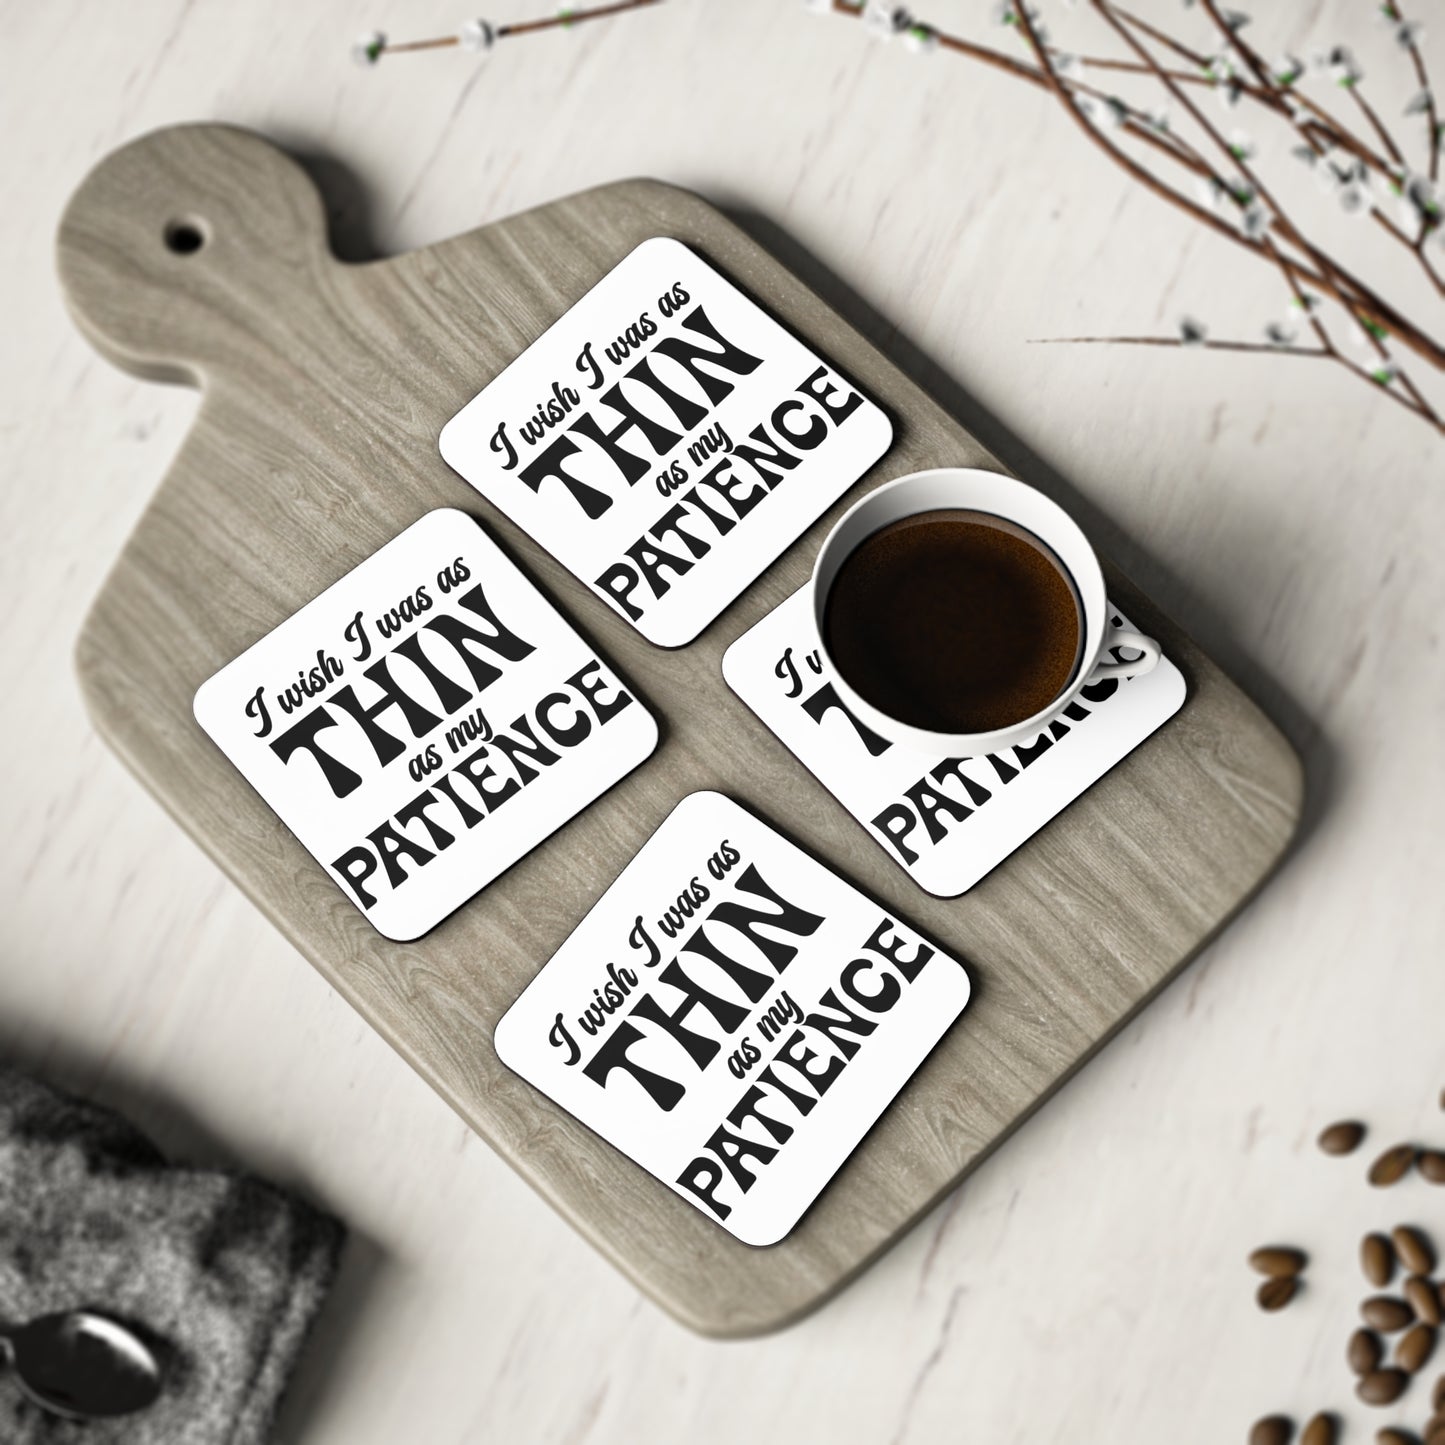 "I Wish I Was As Thin As My Patience" Square Coasters